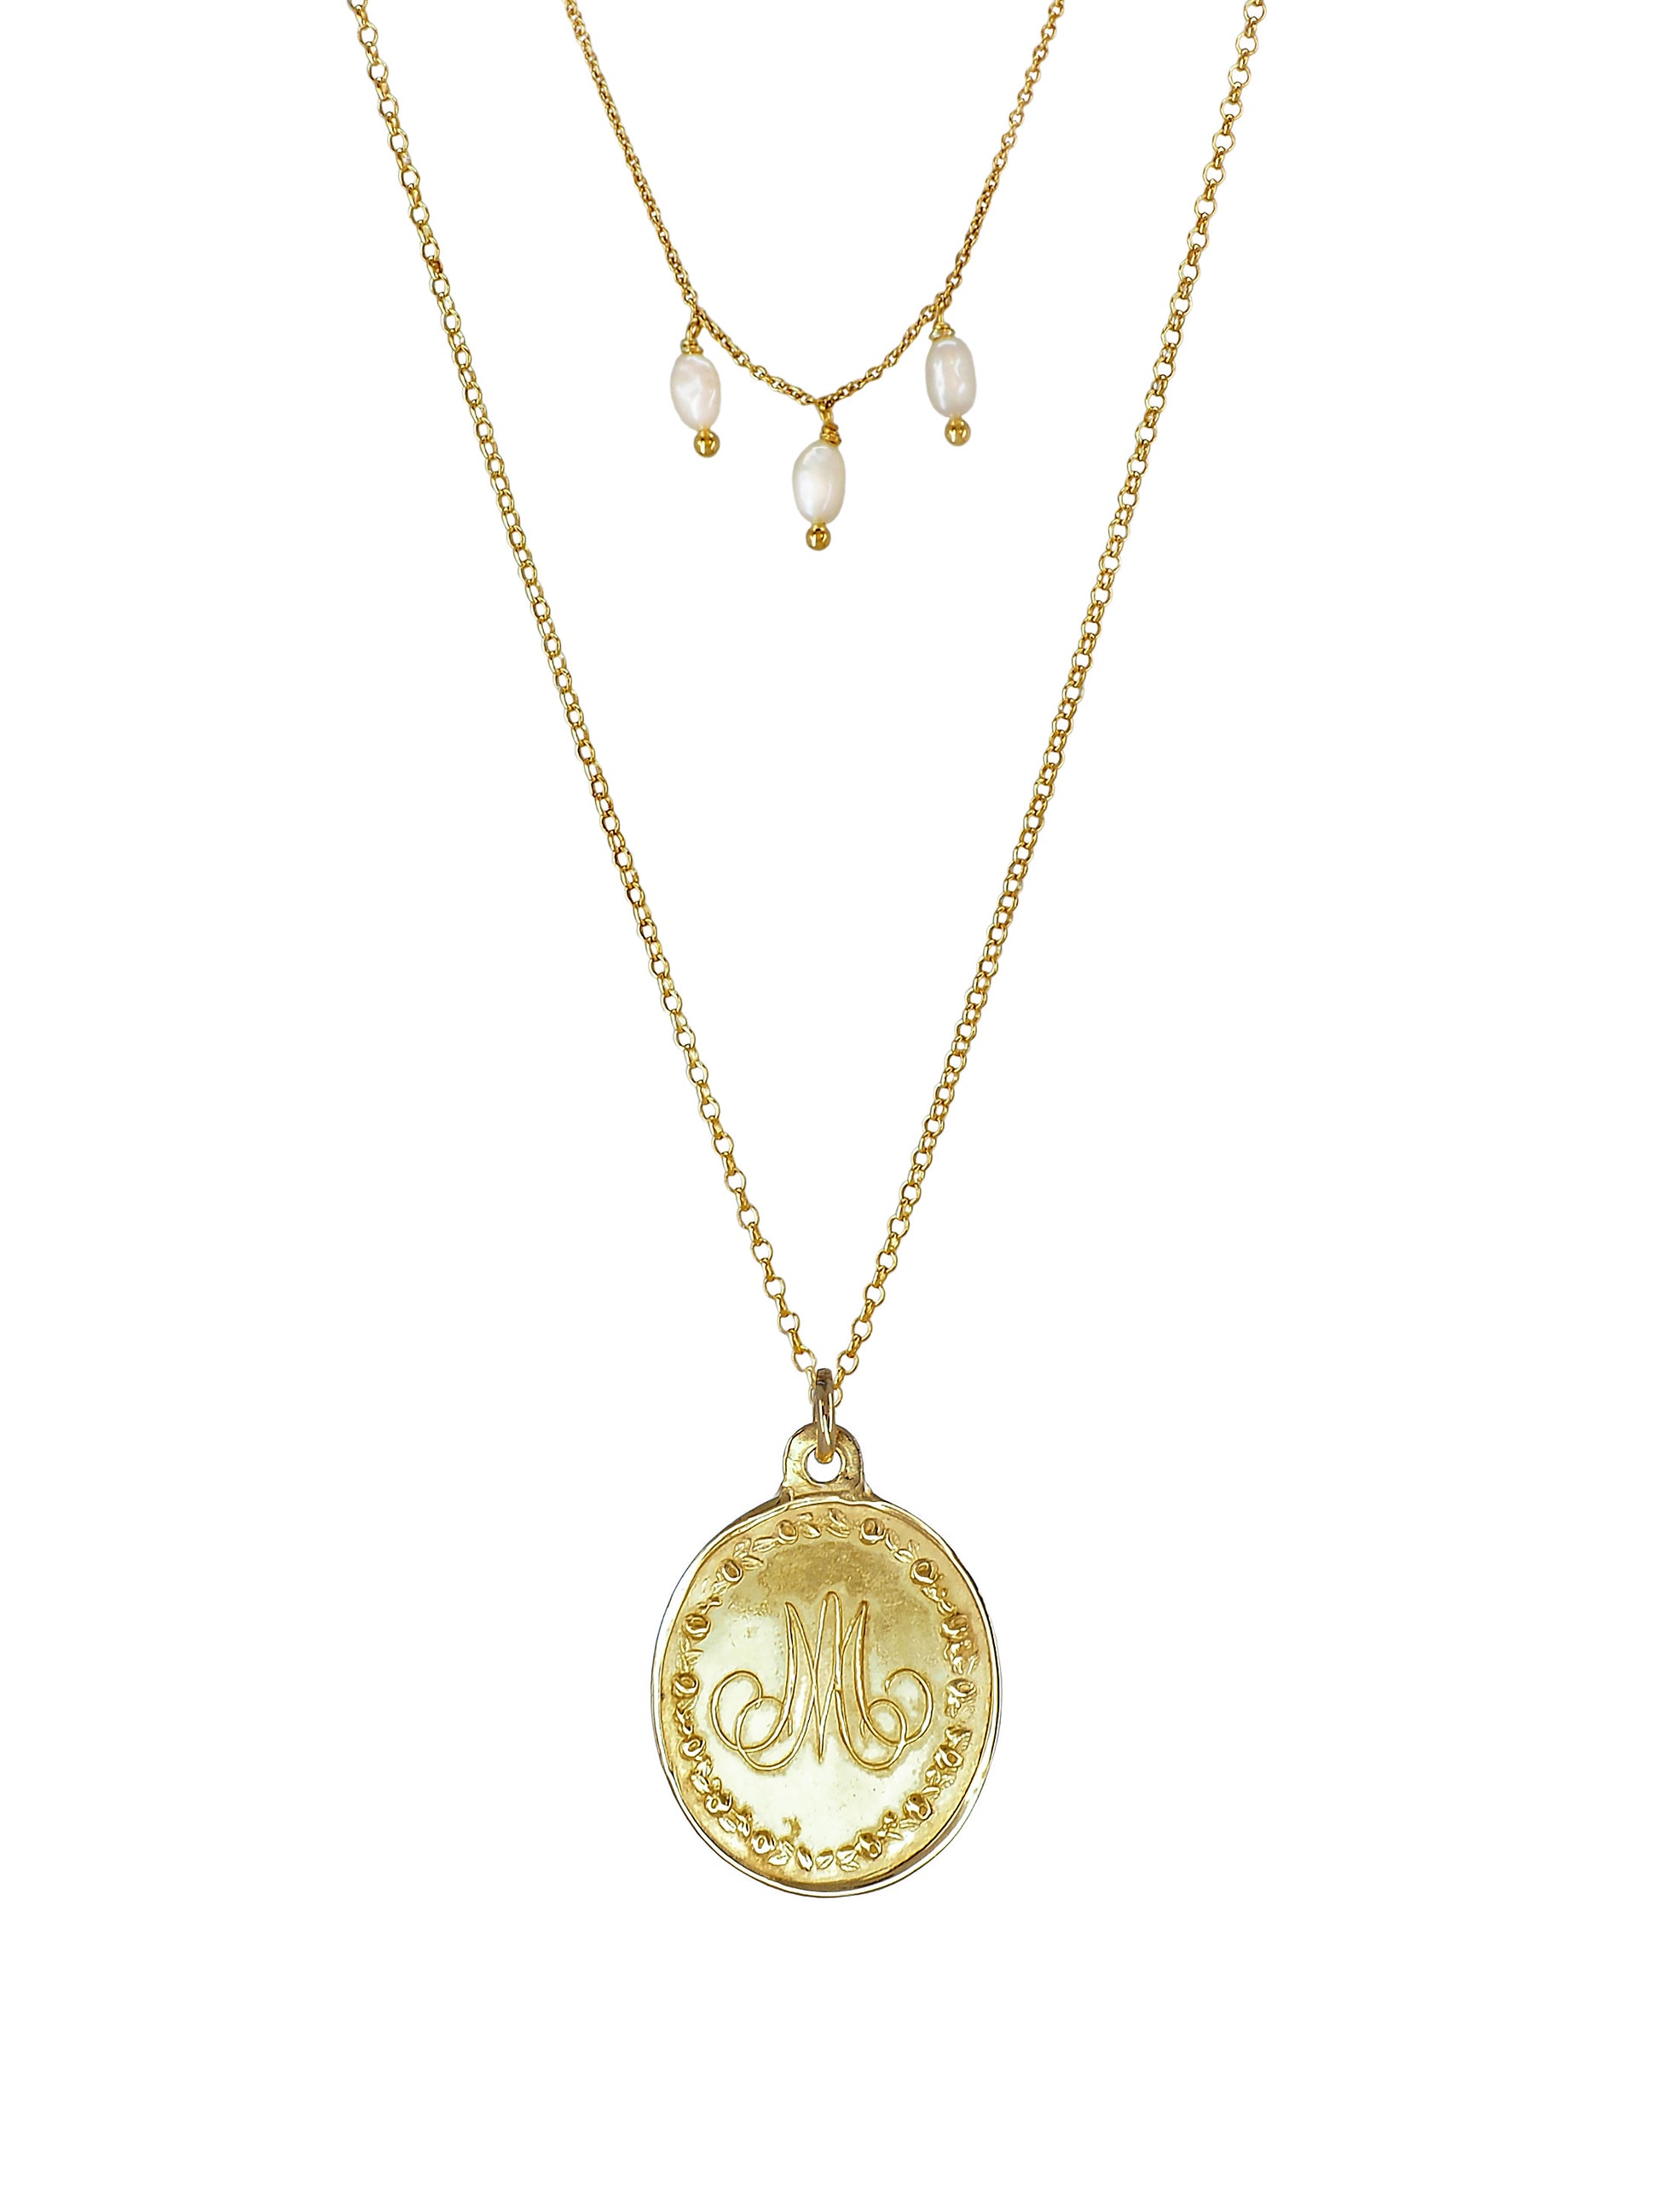 doble layered St Joseph Necklace, M.A Engraved on the other side. Gold plated Sterling Silver and Freshwater pearls